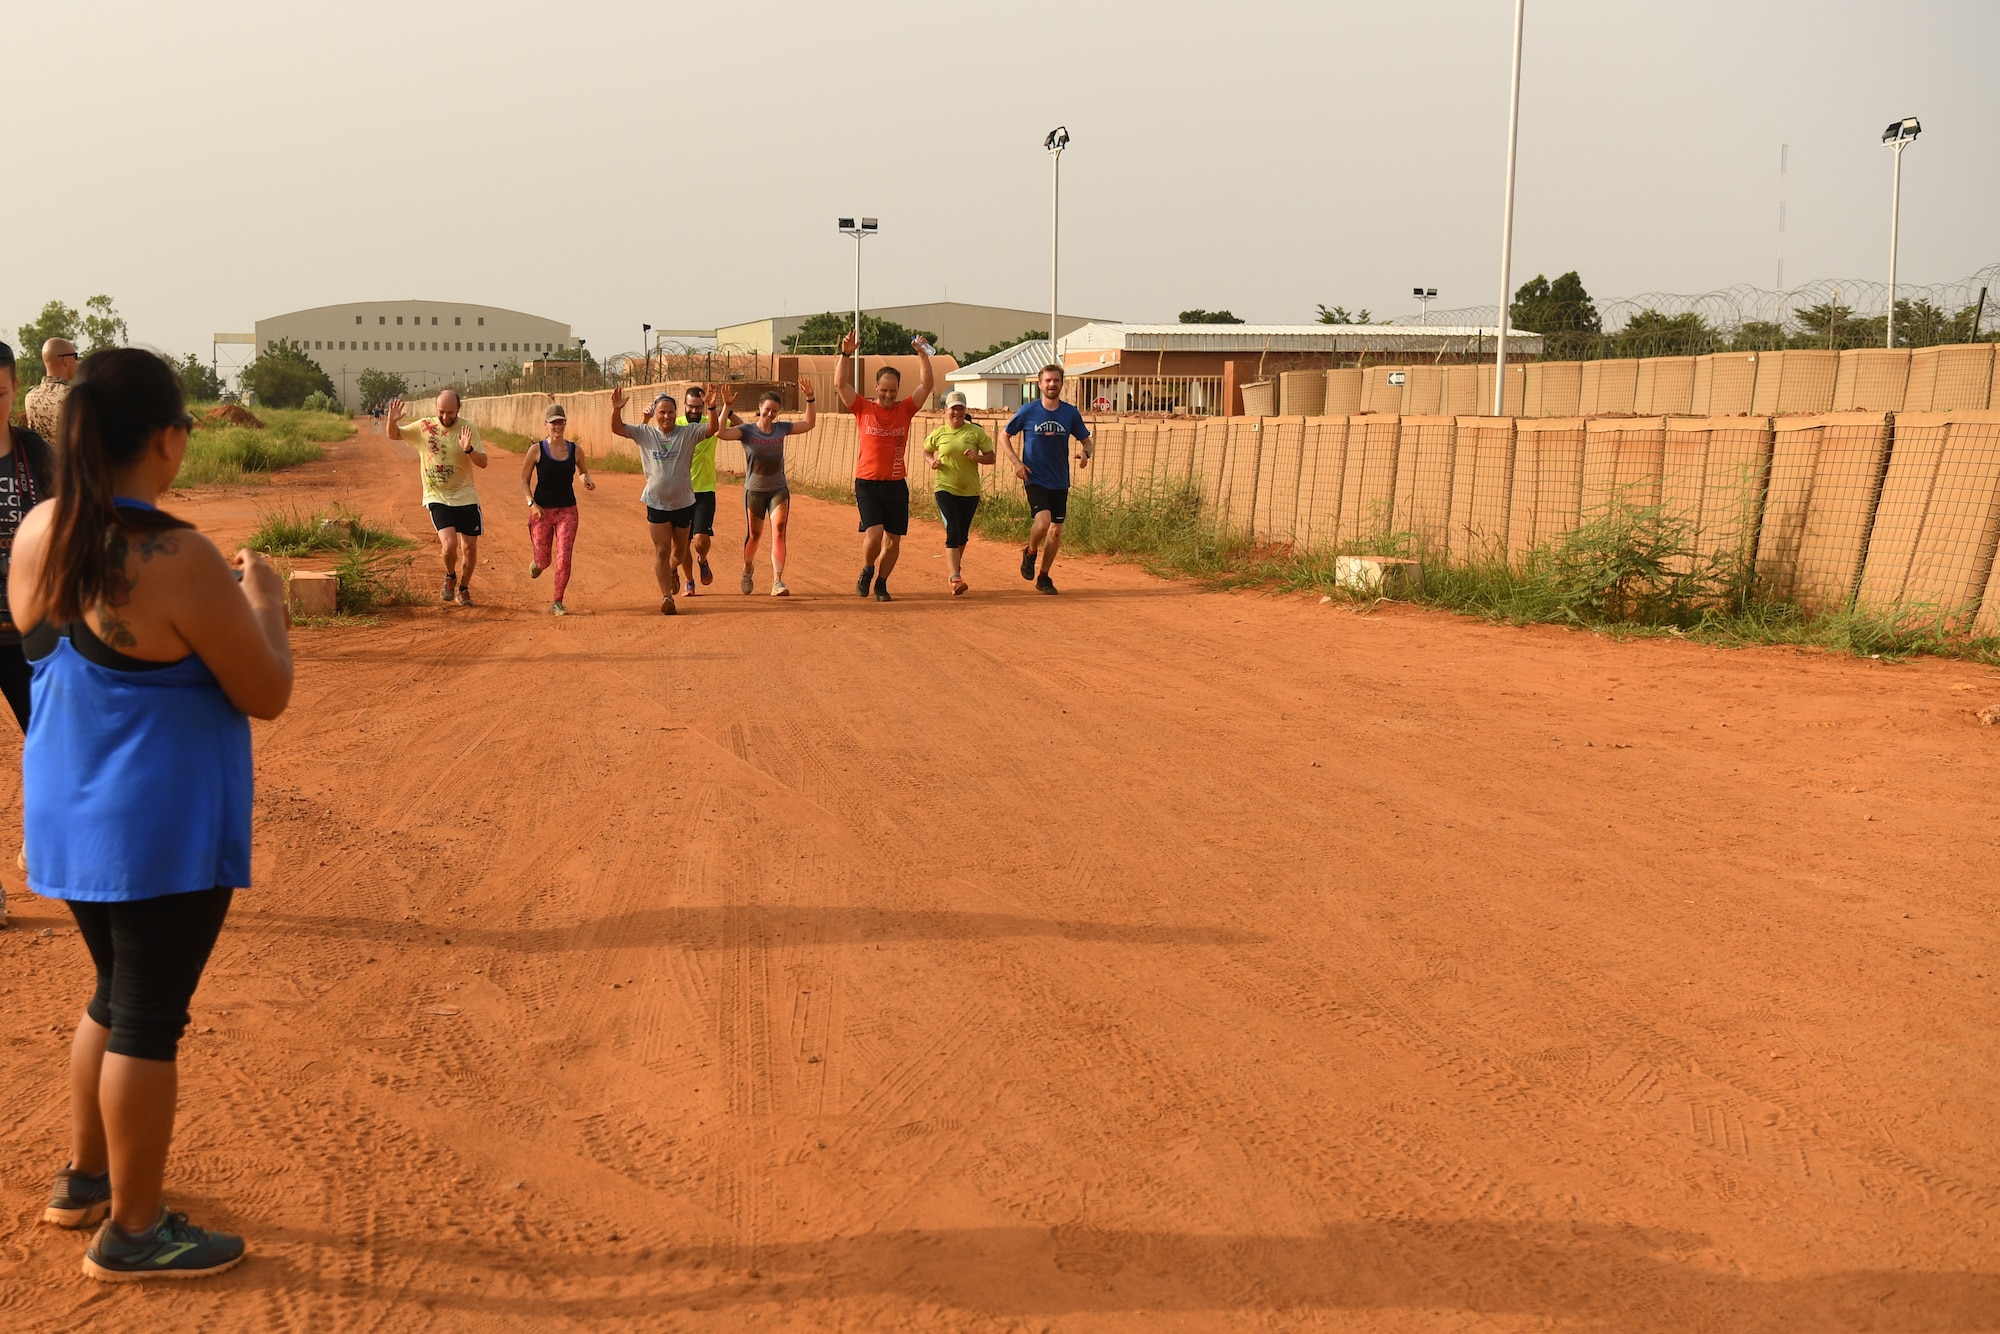 The Tongo Tongo Memorial Challenge consisted of a 5K with four workout stations representing each of the members of Team Ouallam along the way. (U.S. Air Force photo by Tech. Sgt. Rachelle Coleman